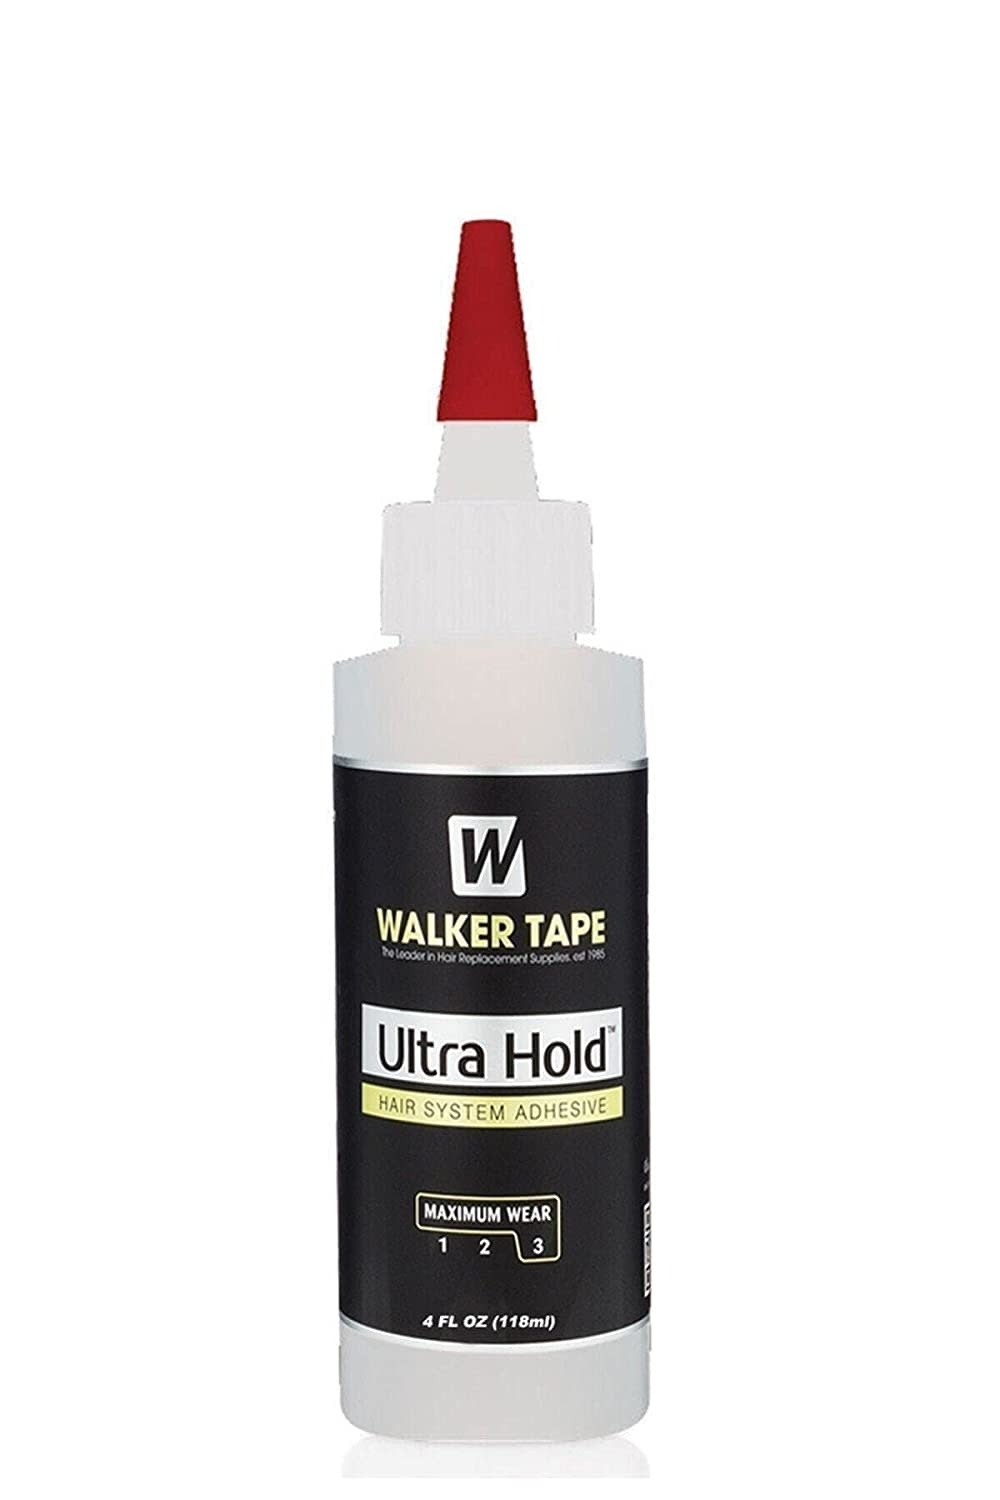 Walker Tape Ultra Hold Nozzle Top Adhesive 4oz - Black Beauty & Supply